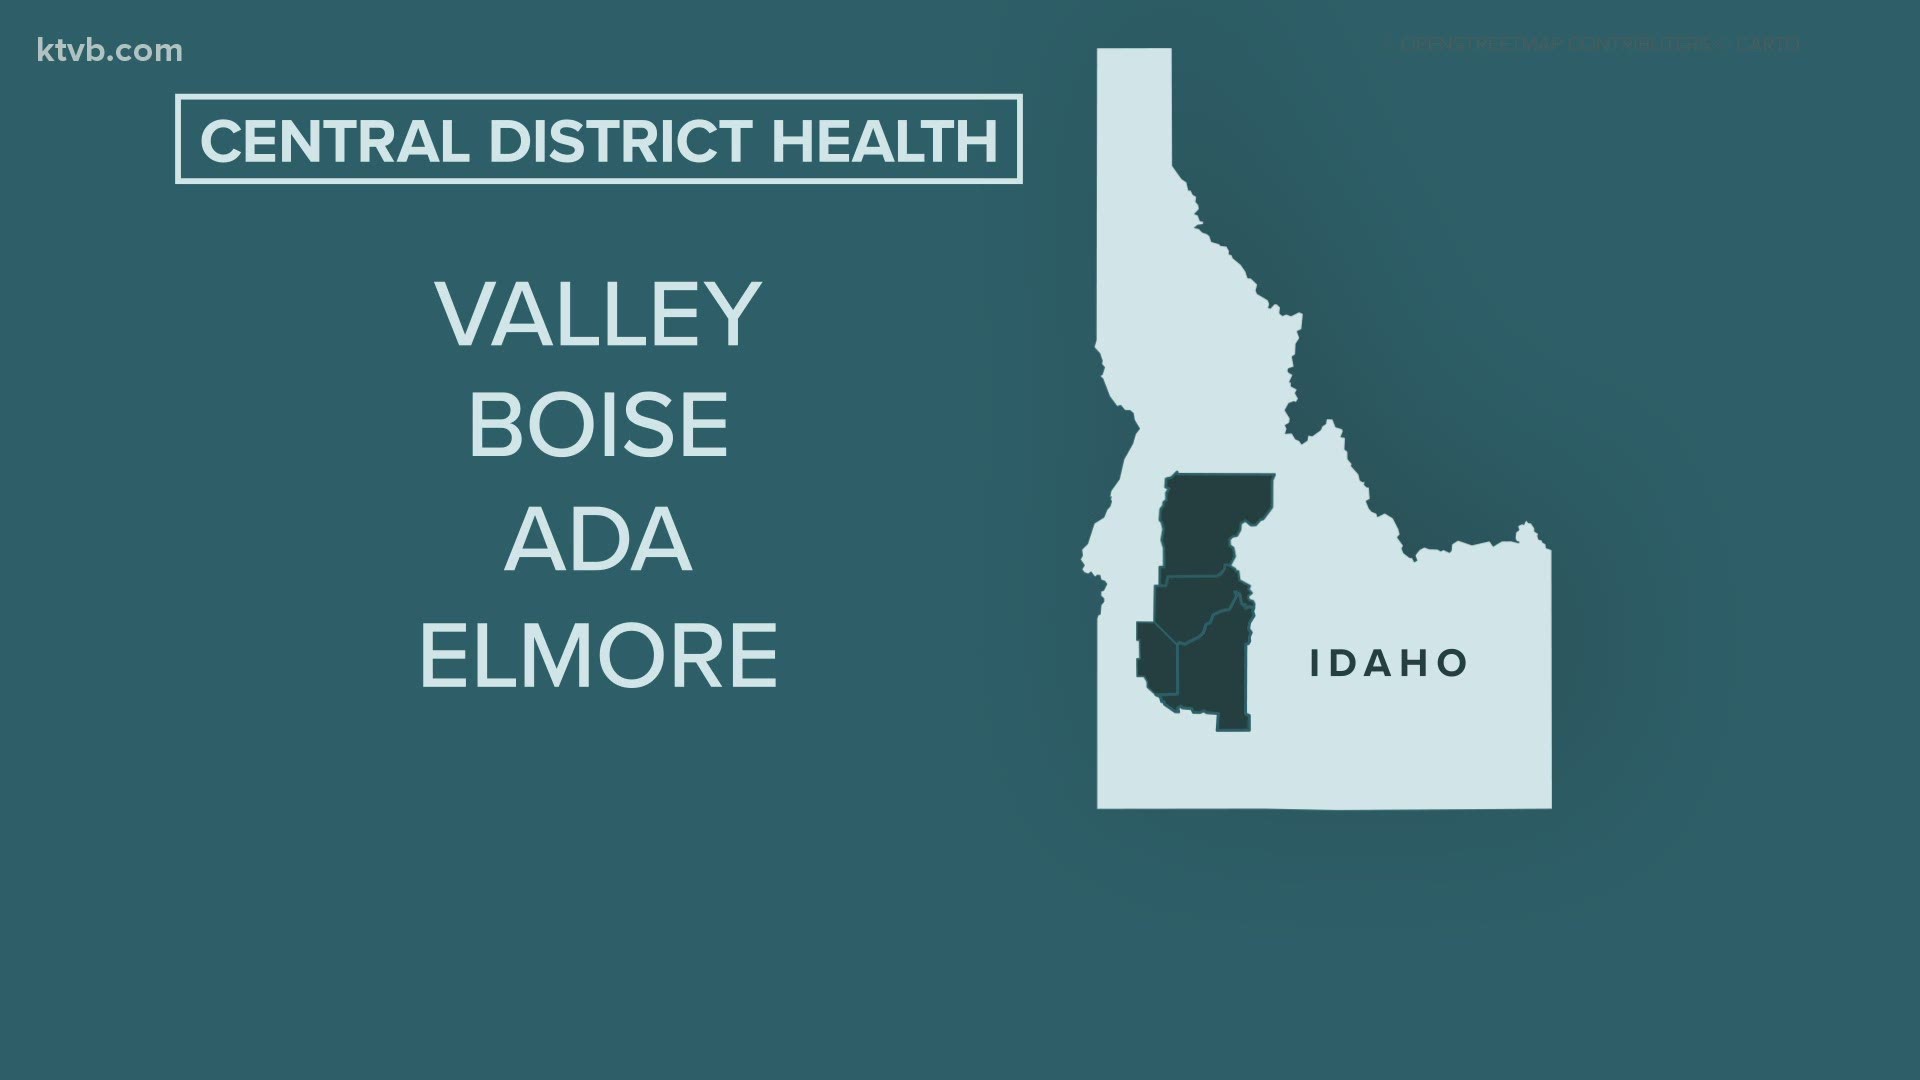 The board will discuss at a meeting on Friday a proposal to escalate the current public health advisory to an order for Ada, Boise, Elmore and Valley counties.